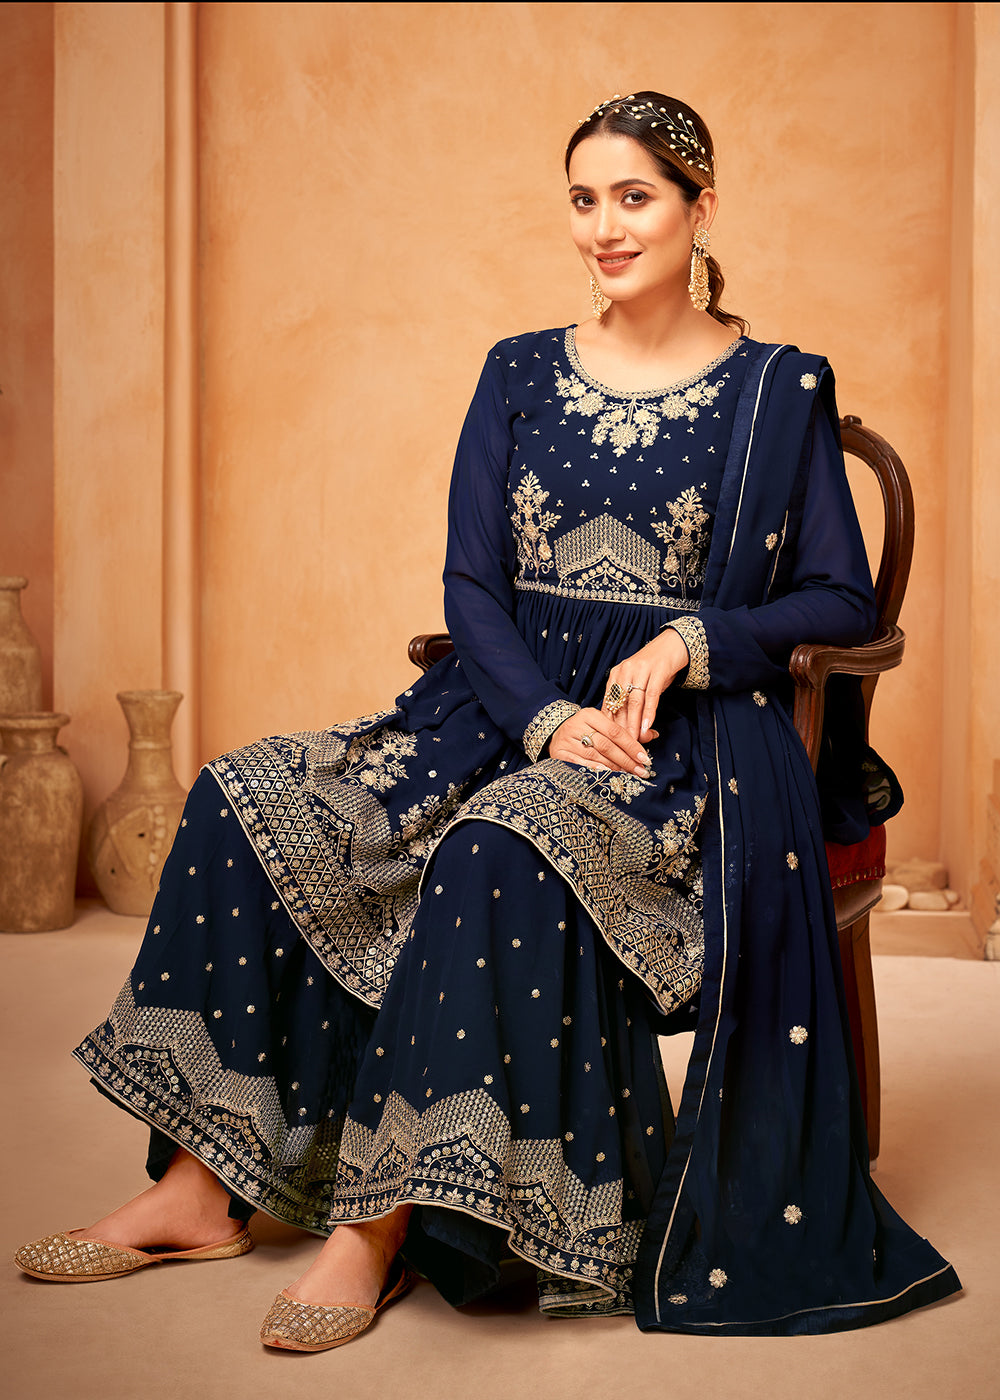 Shop Now Fantastic Navy Blue Embroidered Wedding Festive Gharara Suit Online at Empress Clothing in USA, UK, Canada, Germany & Worldwide. 